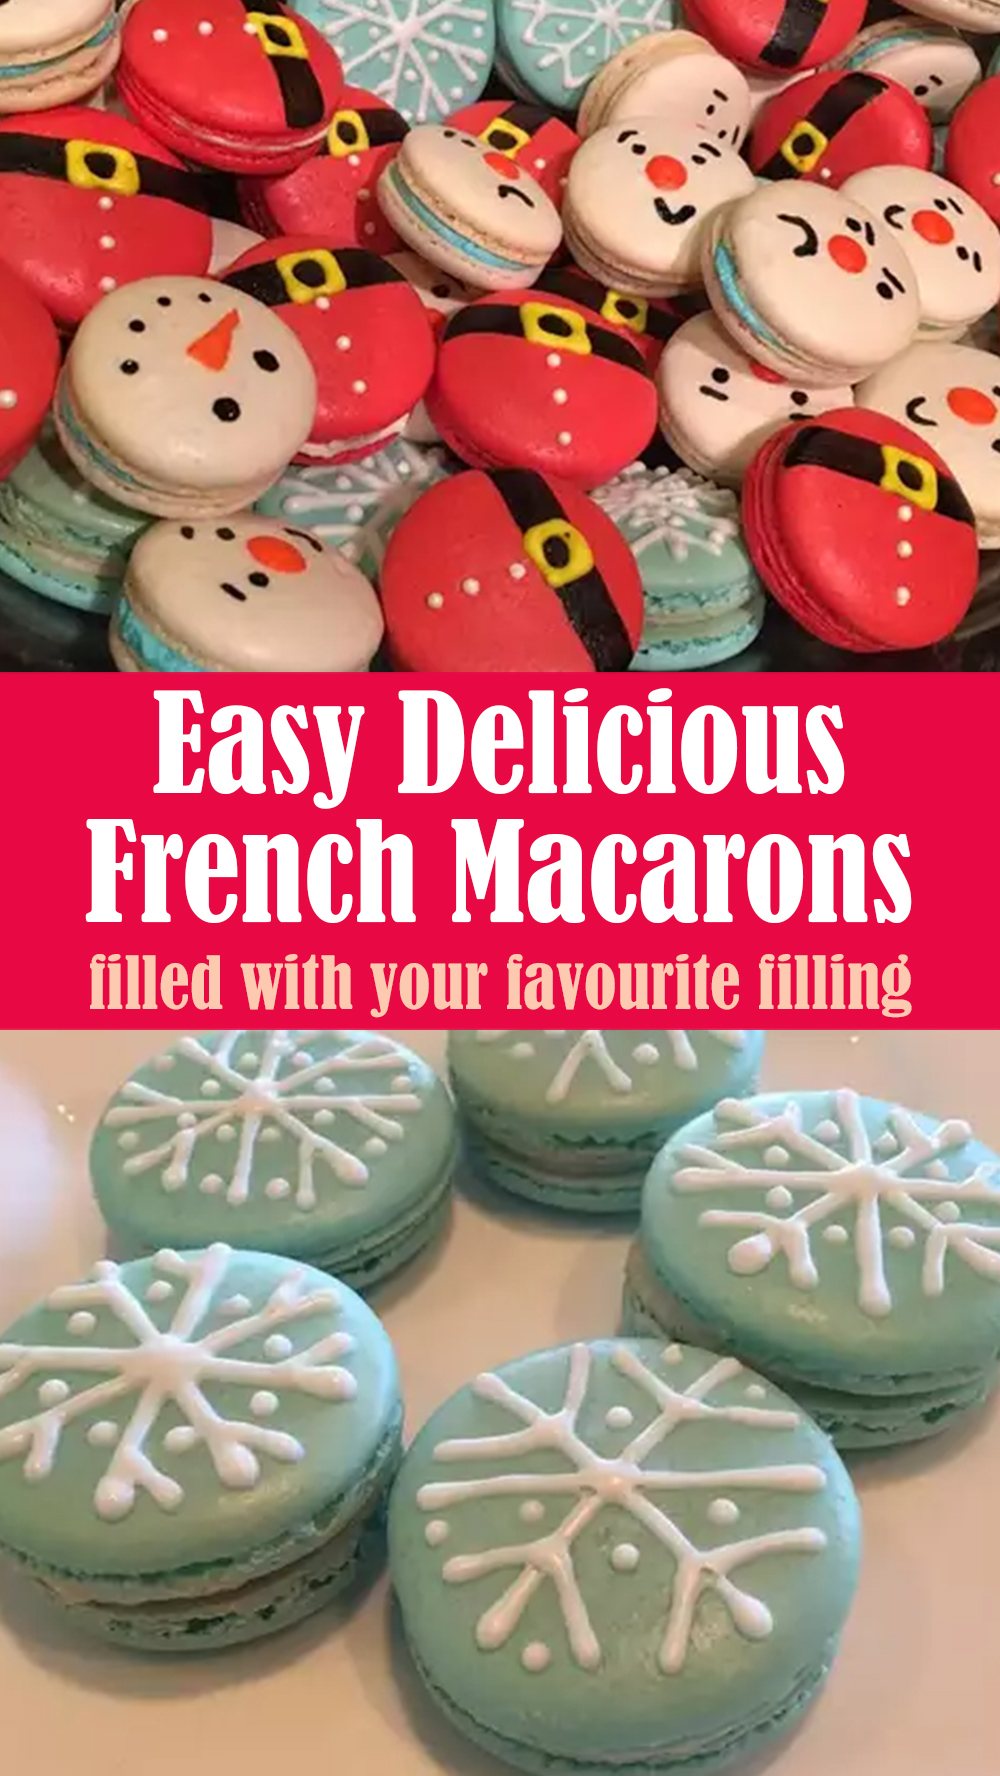 Delicious French Macarons Recipe